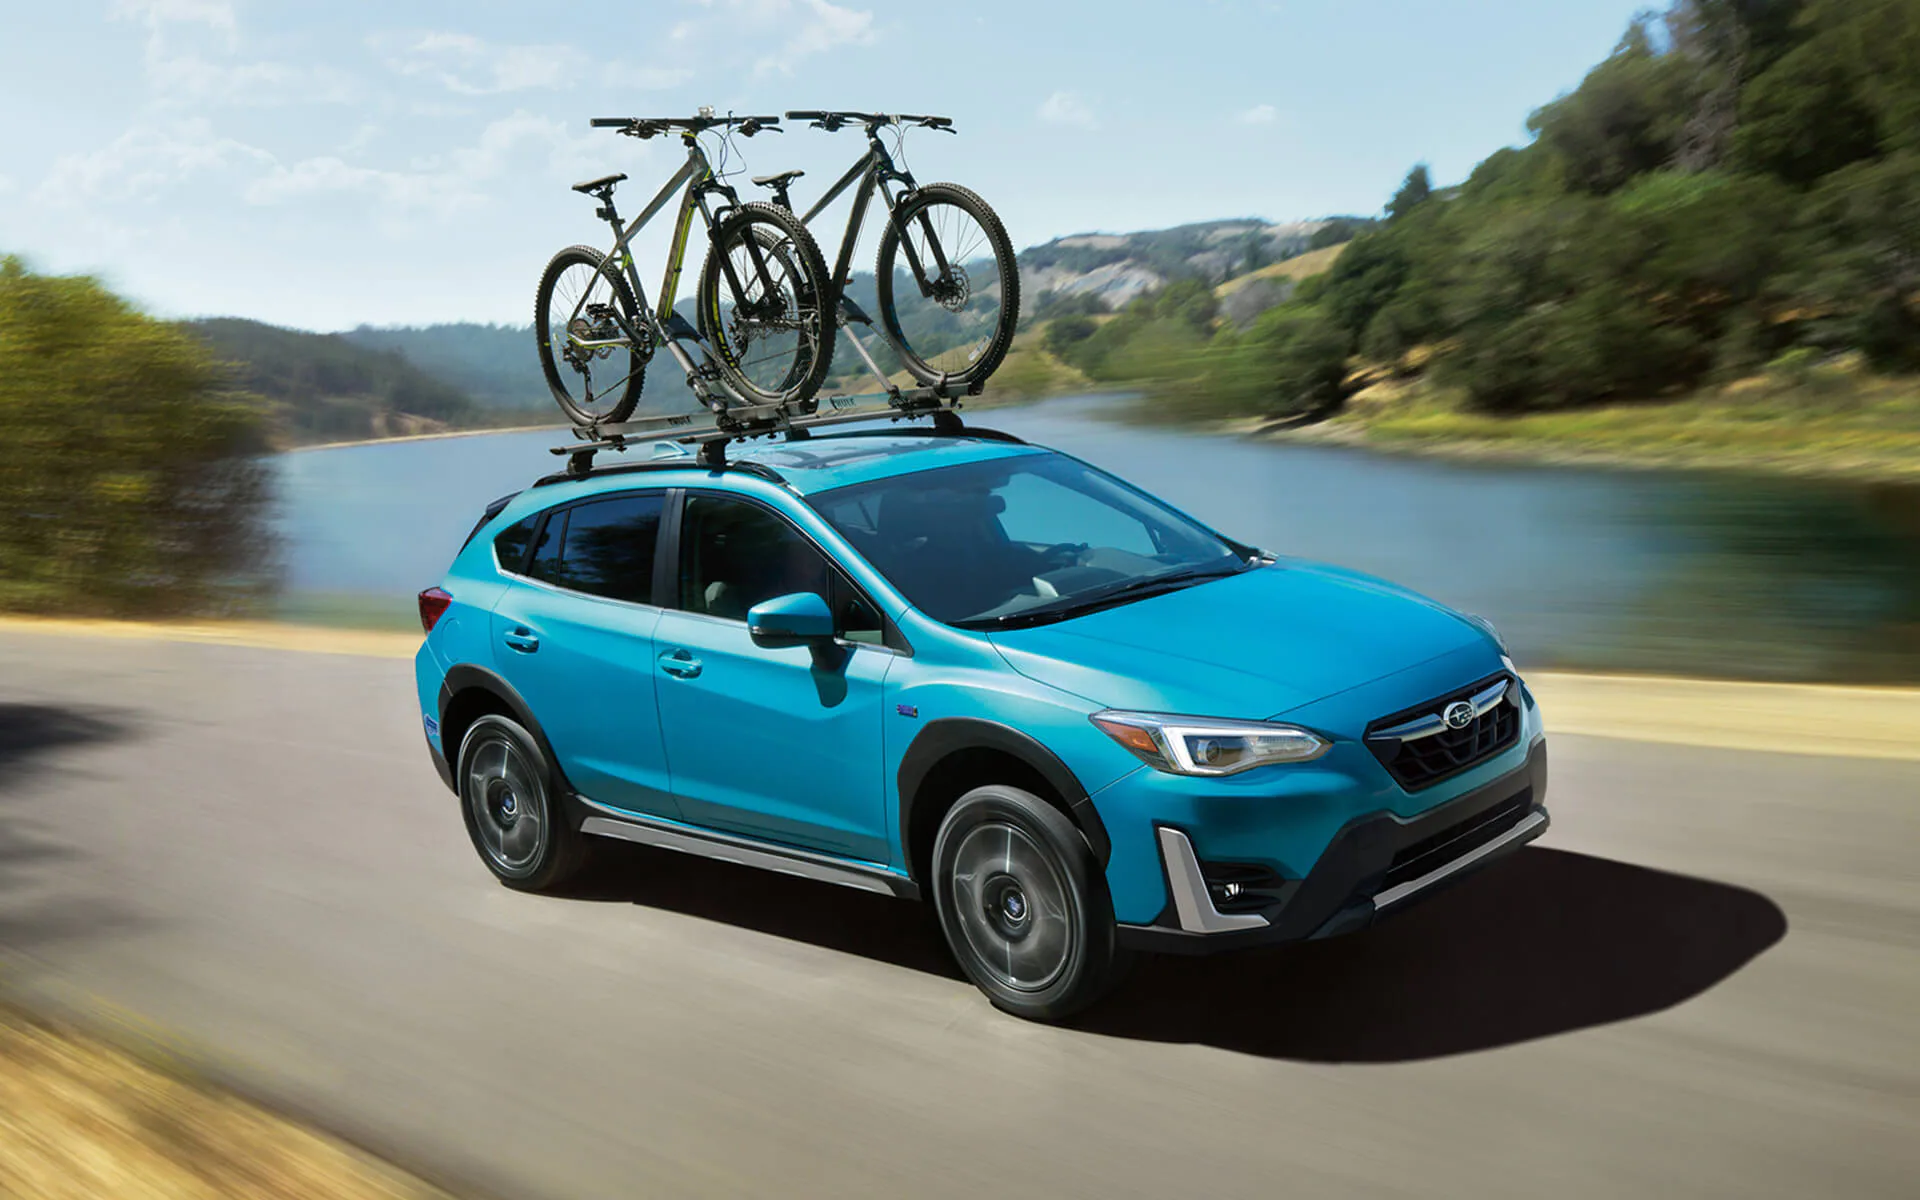 A blue Crosstrek Hybrid with two bicycles on its roof rack driving beside a river